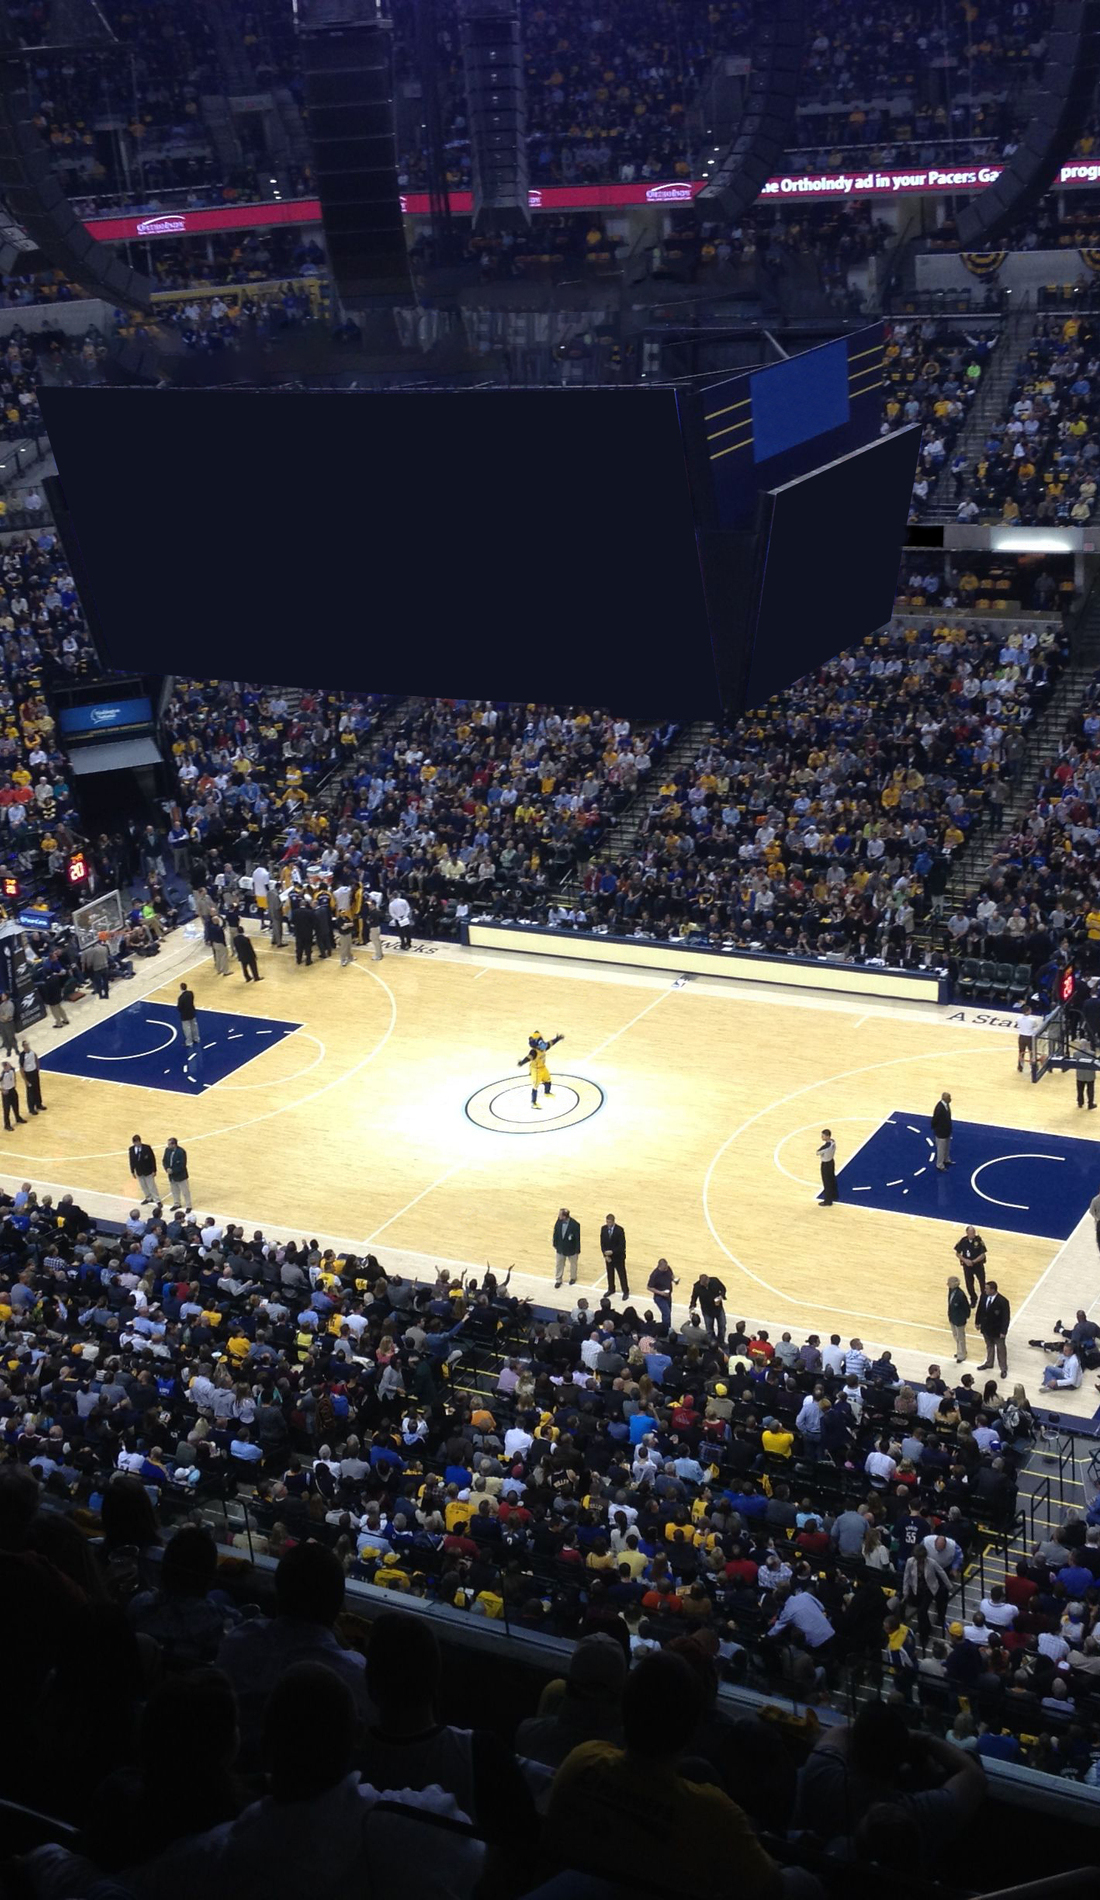 A Indiana Pacers live event